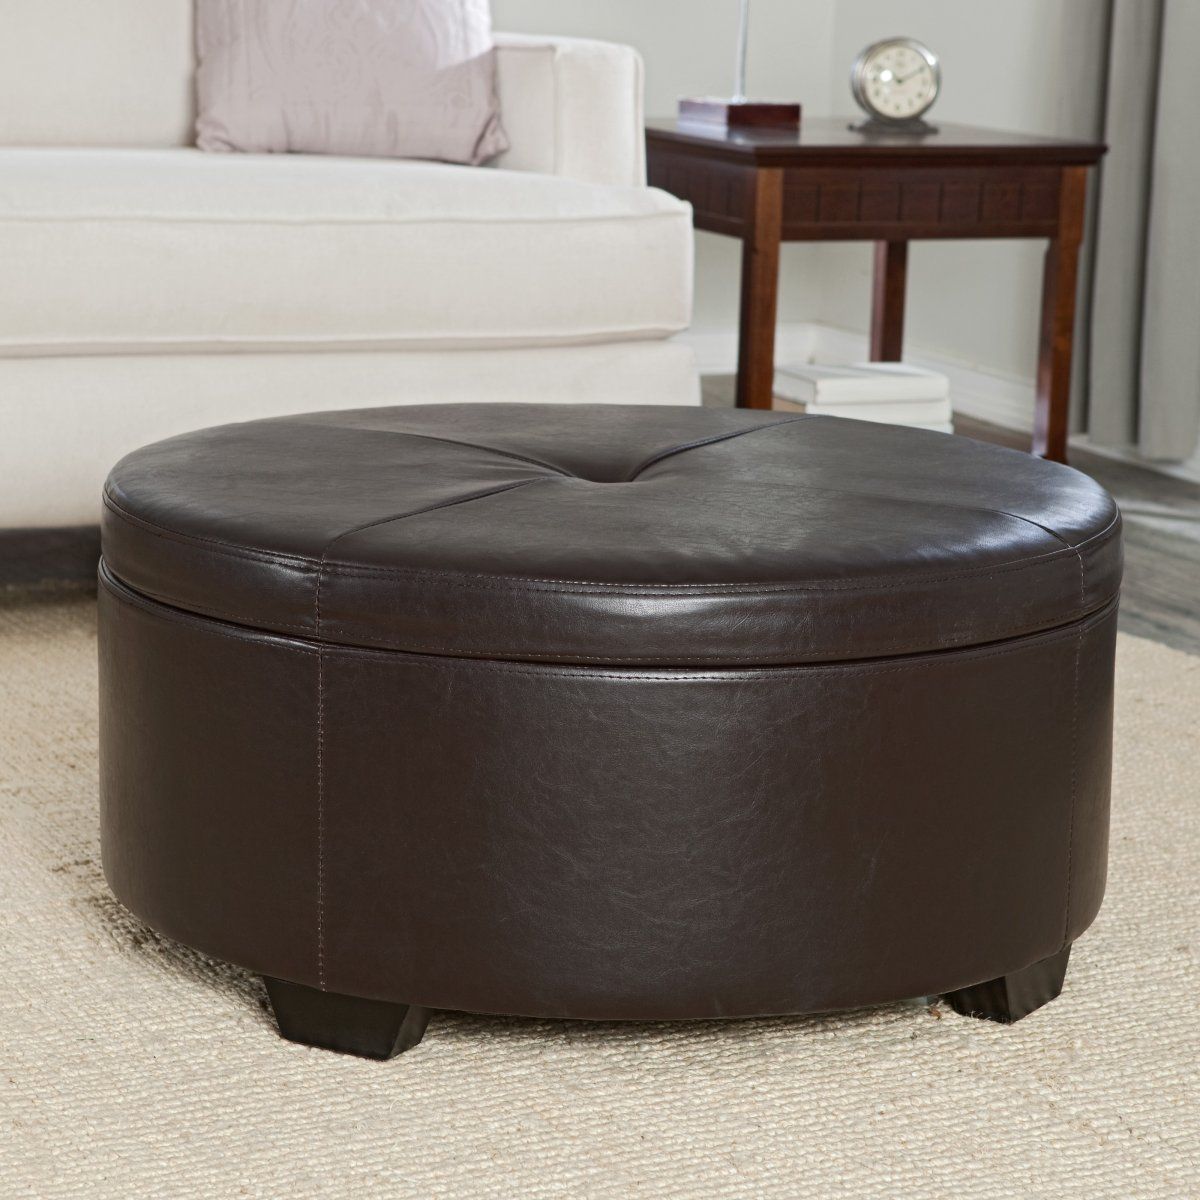 Decorate A Leather Ottoman Coffee Table Round Leather Ottomans Coffee Tables Round Upholstered Ottoman Coffee Table (View 2 of 10)